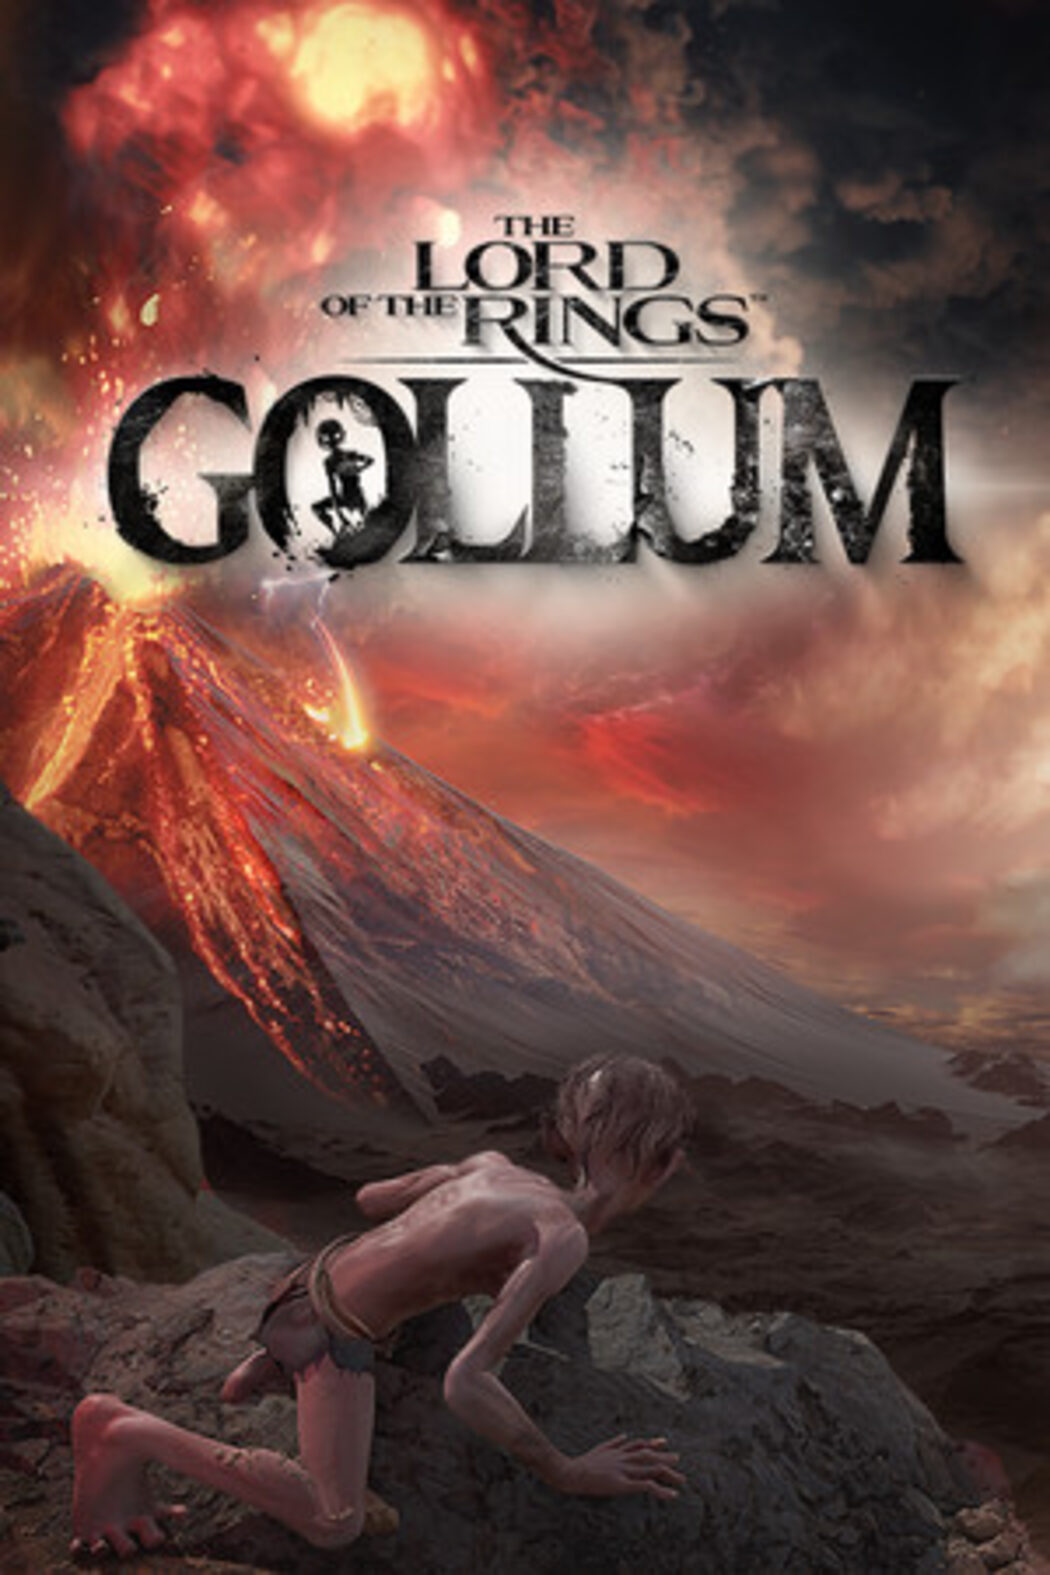 Save 30% on The Lord of the Rings: Gollum™ - Sindarin VO on Steam